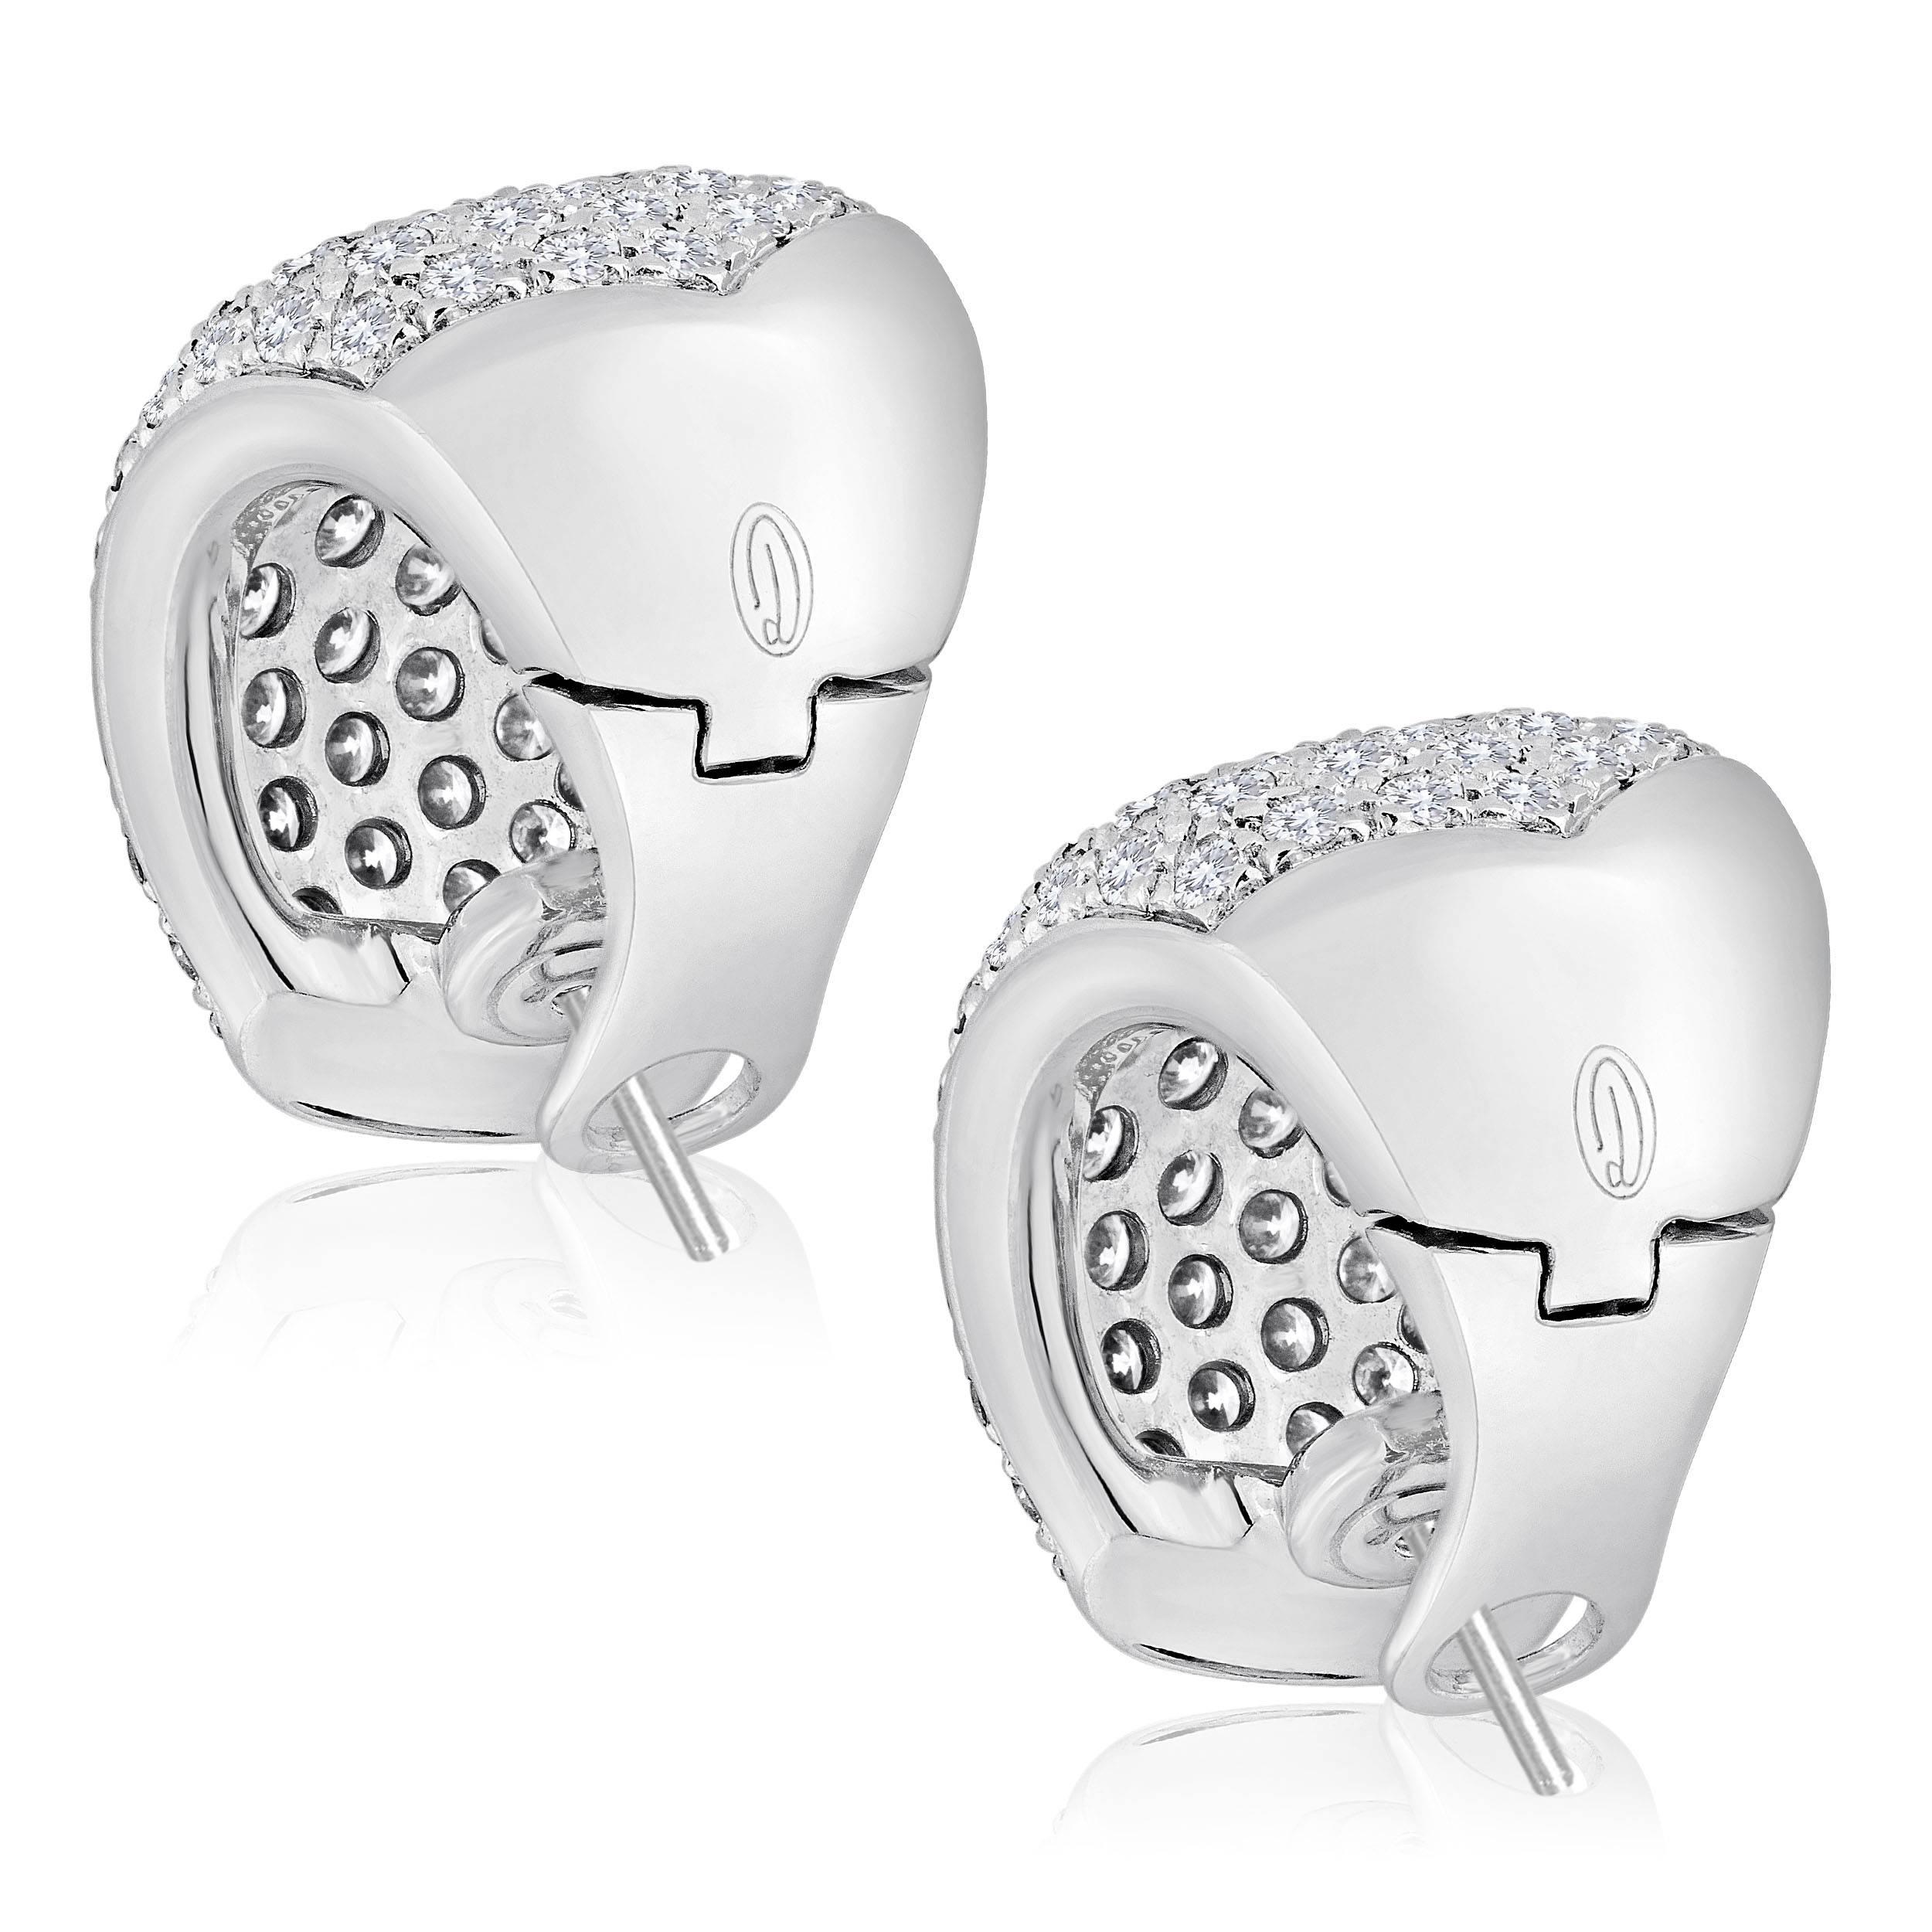 DAMIANI Earrings Made in Italy
Half Huggie Hoop Earrings
The earrings are 18K White Gold
There are 5.00 Carats In Diamonds F VS
They measure approximately .75” x .50”.
The earrings are posts with a solid omega.
The earrings weigh 16.4 grams